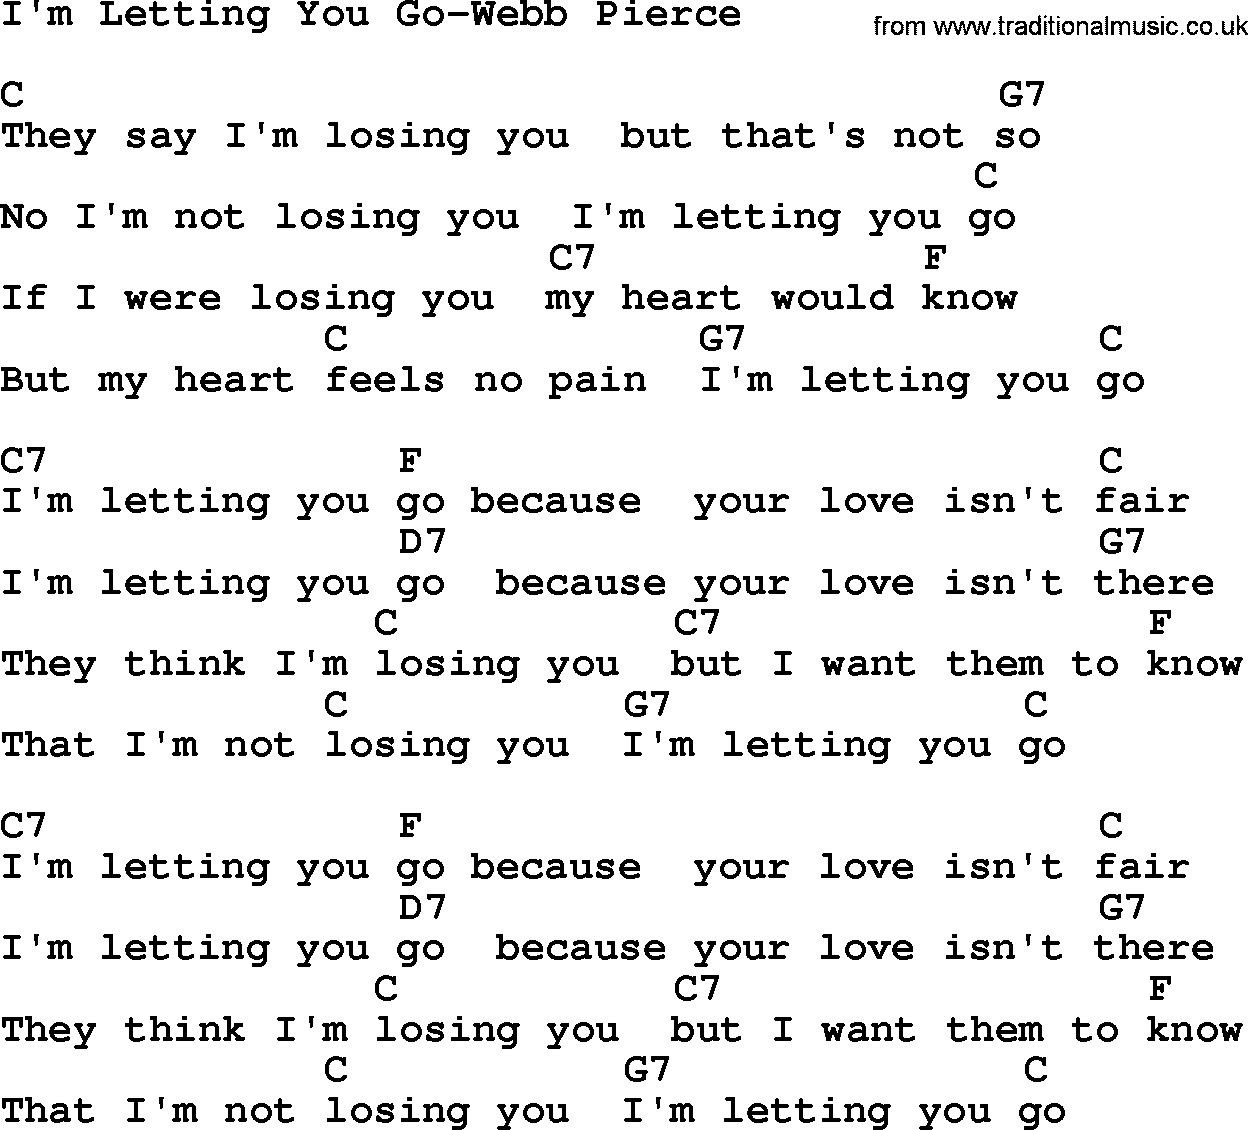 Country music song: I'm Letting You Go-Webb Pierce lyrics and chords